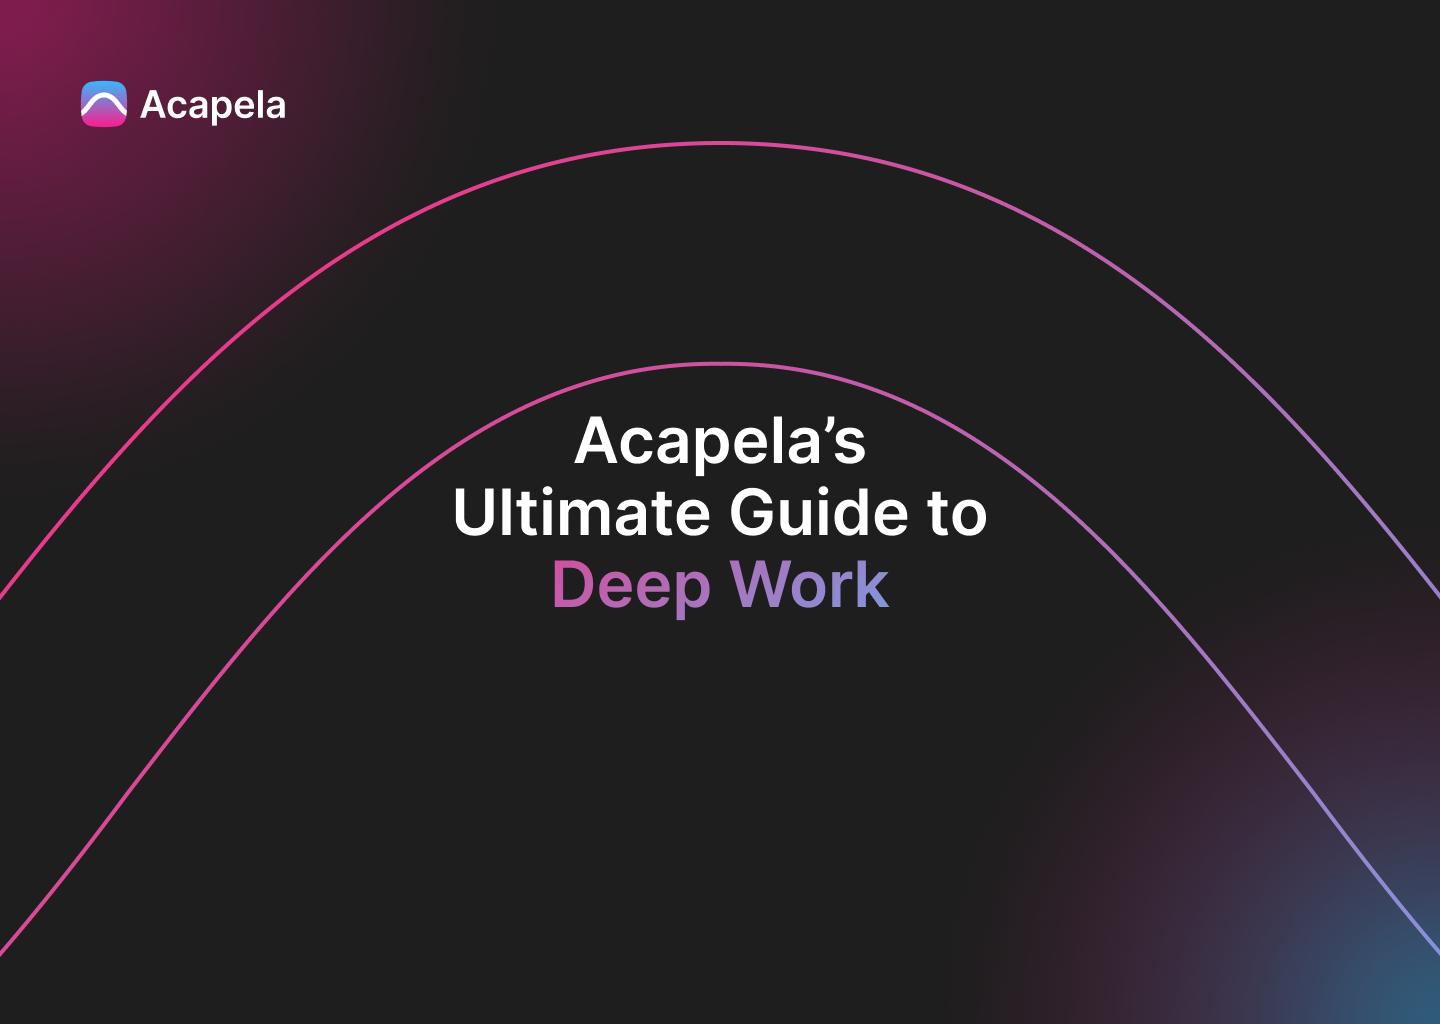 Deep work: A complete guide